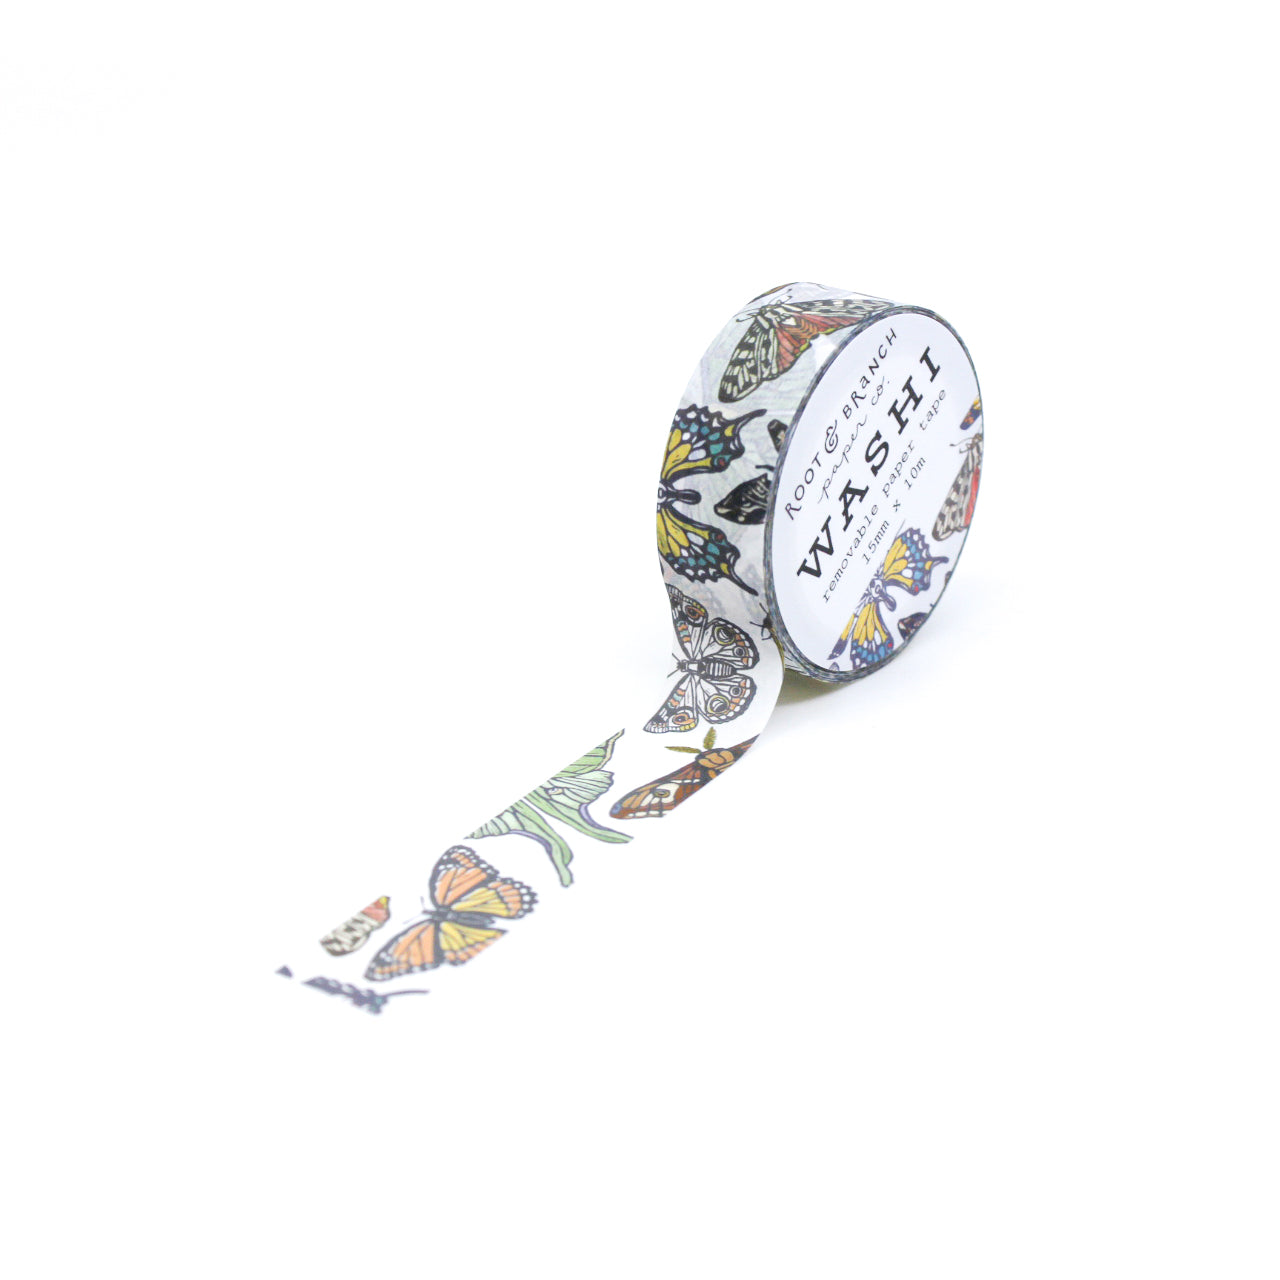  Elevate your creative projects with a 'Variety of Butterflies and Moths' Washi Tape featuring intricate winged creatures in rich, vivid colors. This tape is from Root & Branch Paper Co. and sold at BBB Supplies Craft Shop.